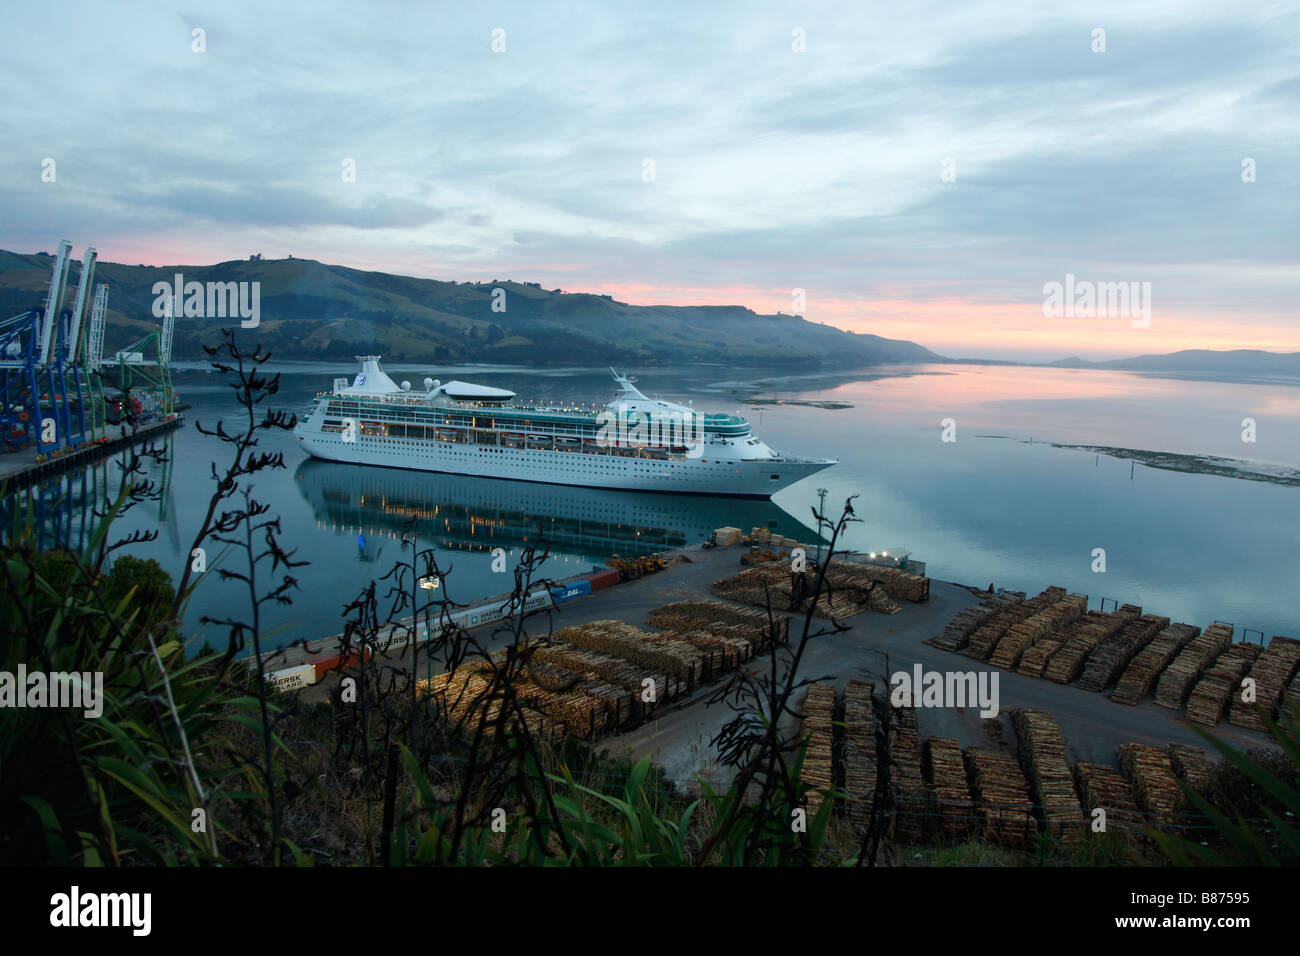 Rhapsody of the Seas cruise ship liner arriving at dawn at Port Chalmers,Otago,, Suth Island, New Zealand Stock Photo